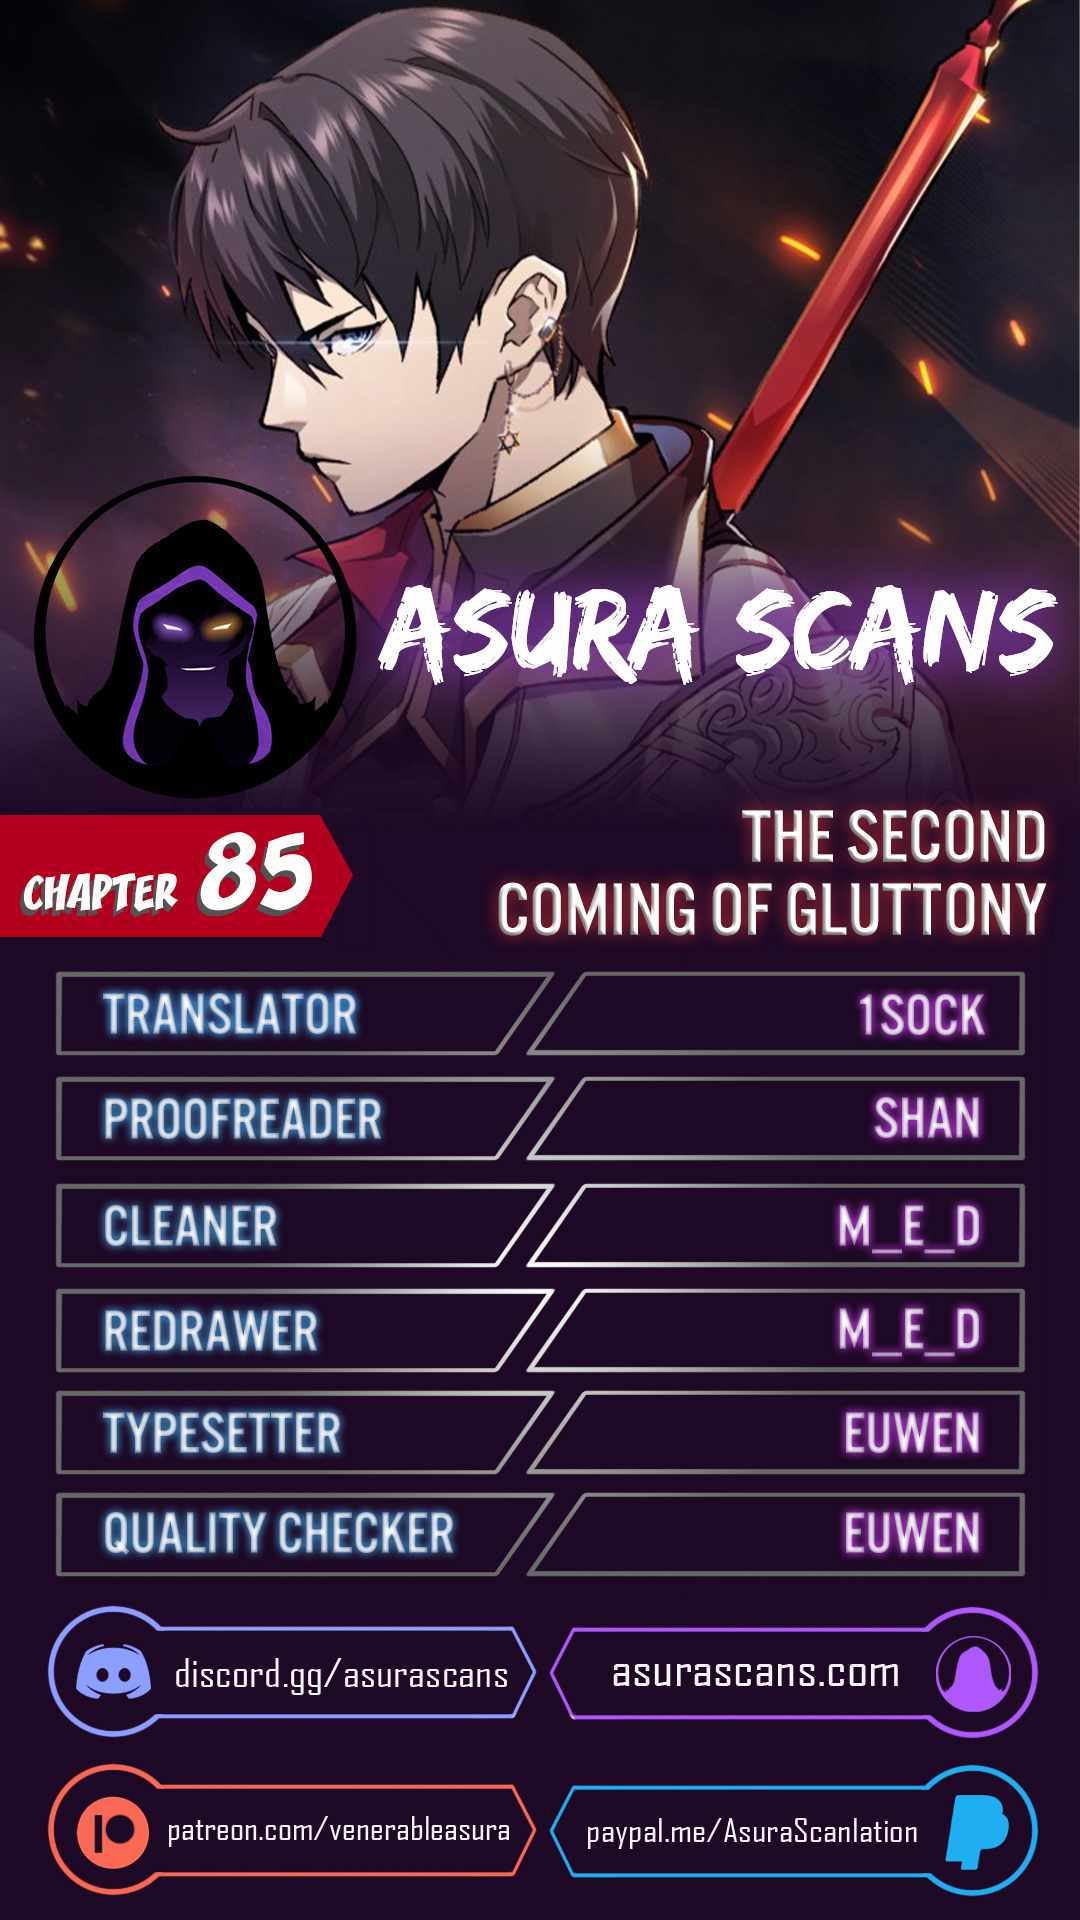 The Second Coming of Gluttony Chapter 85, The Second Coming of Gluttony 85, Read The Second Coming of Gluttony Chapter 85, The Second Coming of Gluttony Chapter 85 Manga, The Second Coming of Gluttony Chapter 85 english, The Second Coming of Gluttony Chapter 85 raw manga, The Second Coming of Gluttony Chapter 85 online, The Second Coming of Gluttony Chapter 85 high quality, The Second Coming of Gluttony 85 chapter, The Second Coming of Gluttony Chapter 85 manga scan